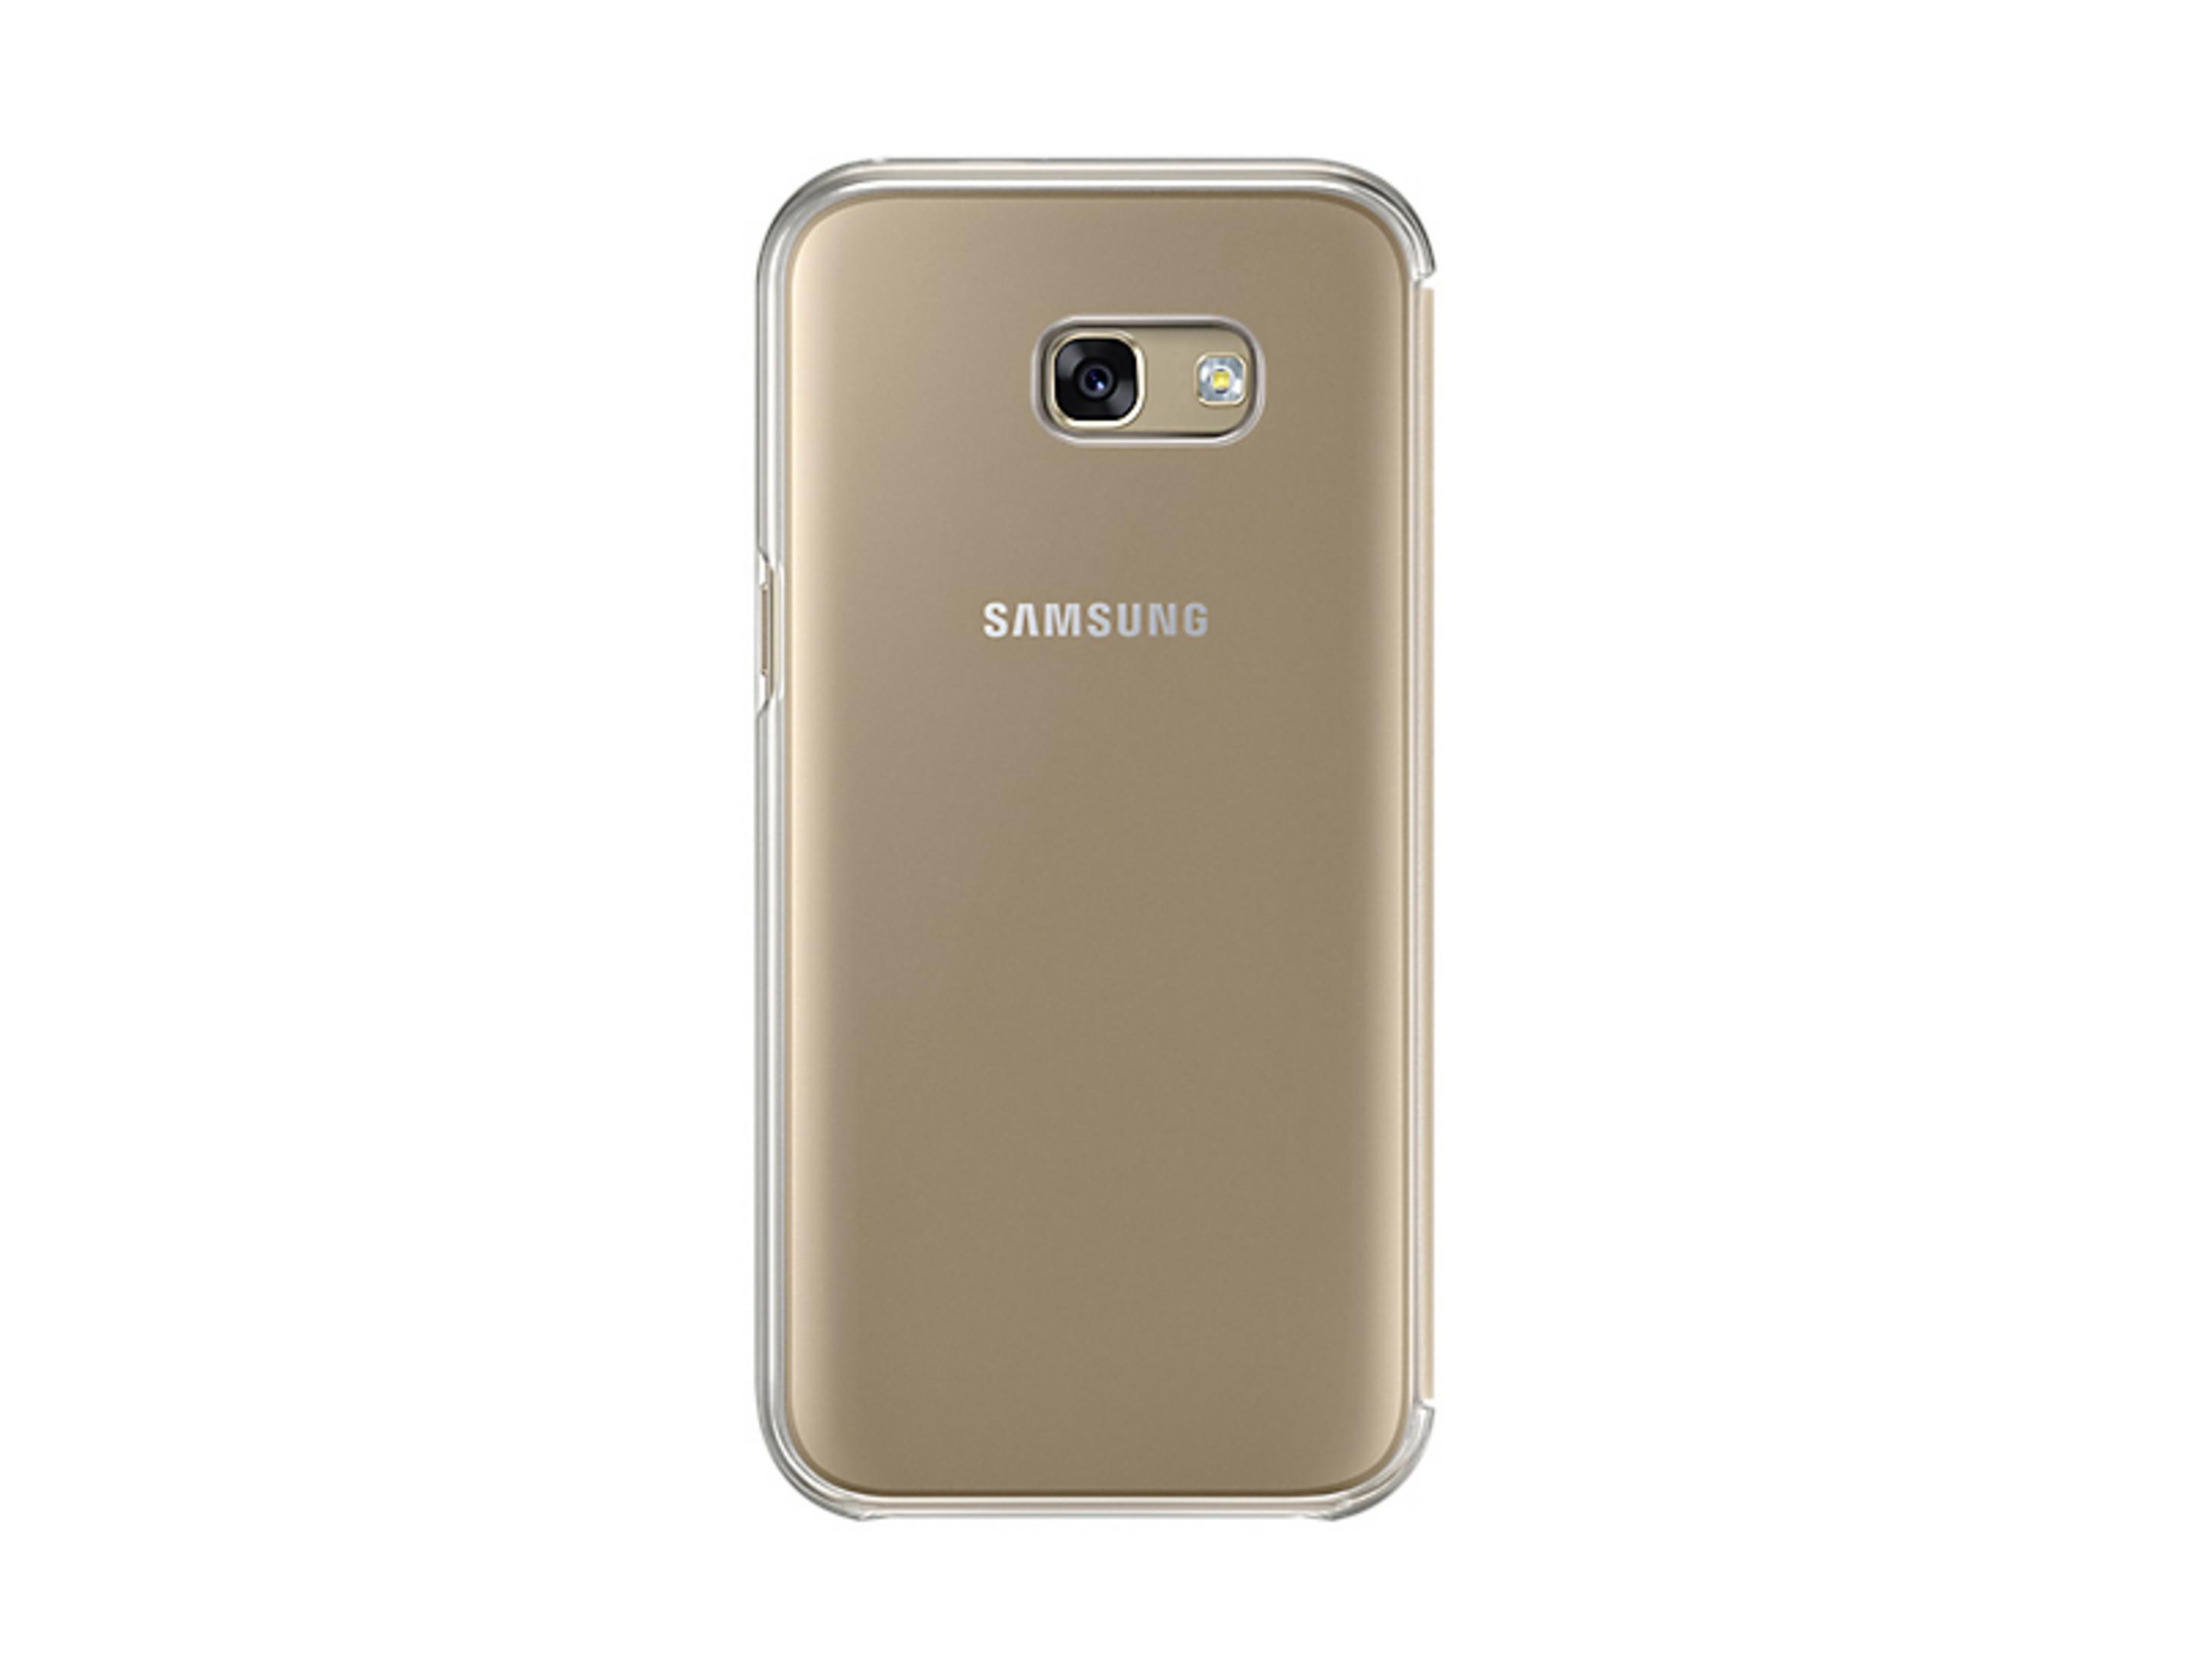 A5 (2017), 2017 VIEW CLEAR SAMSUNG GAL. GOLD A5 Gold Samsung, Galaxy EF-ZA520 COVER, Bookcover,